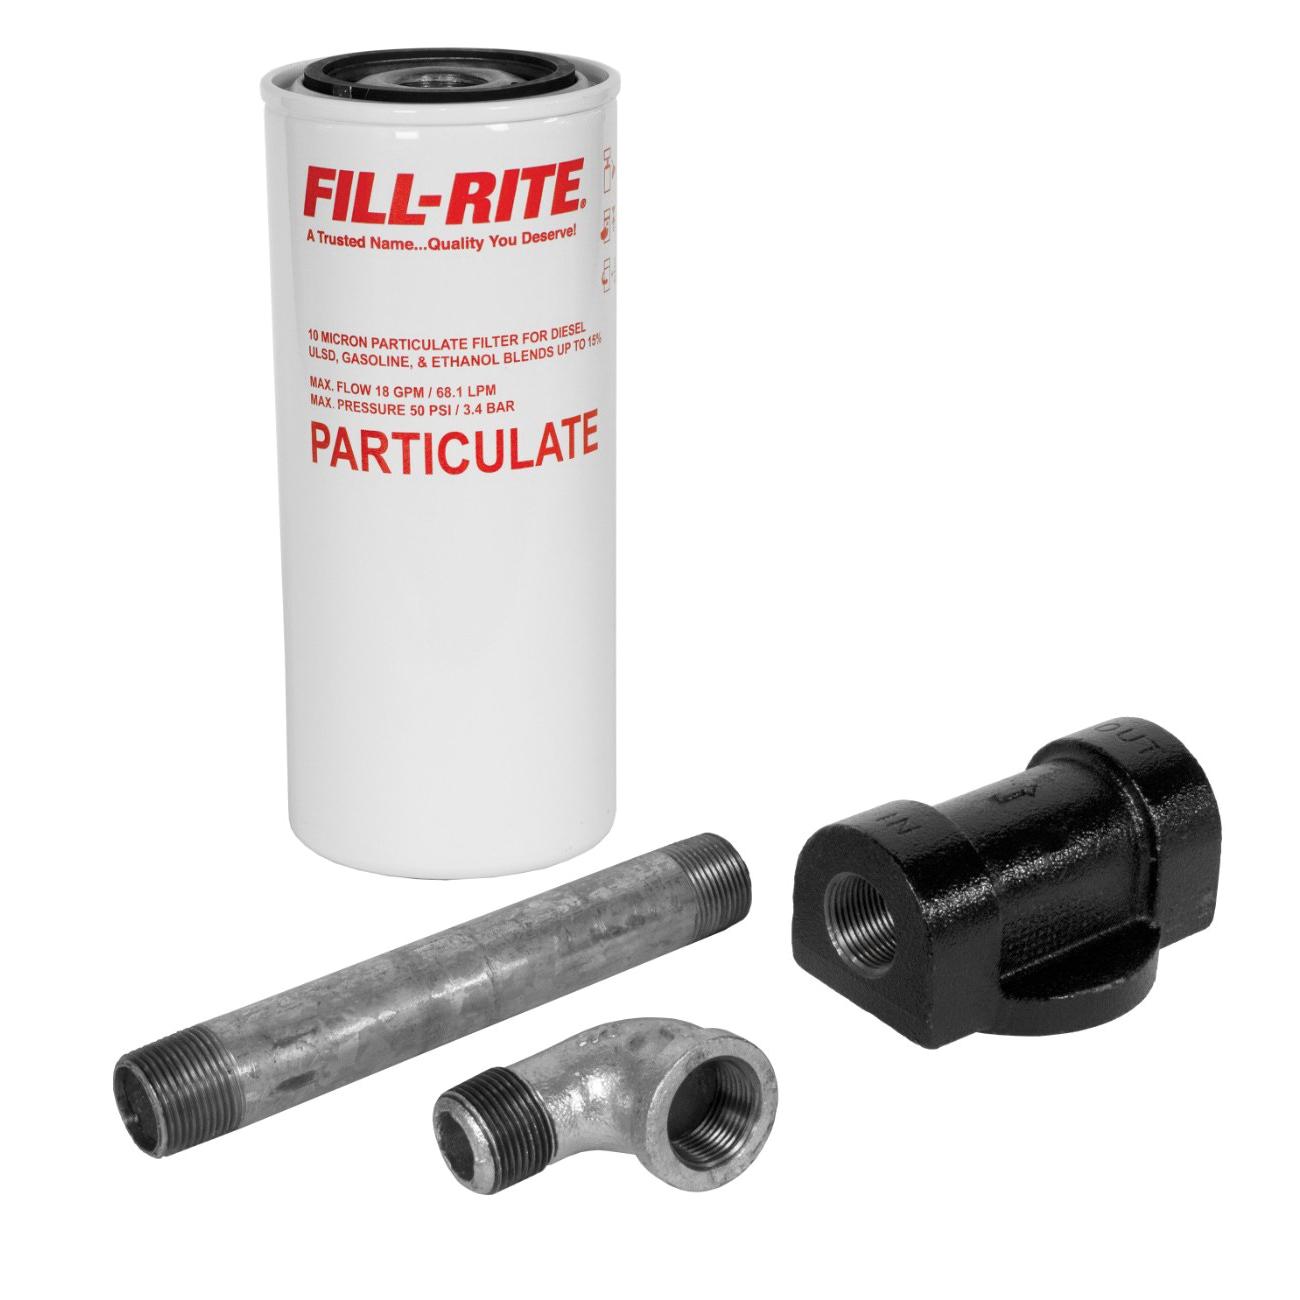 FILL-RITE® Hydrosorb® 1200KTF7018 Particulate Filter With 3/4 in Filter Head Kit, 1-12 Connection, UNF Connection